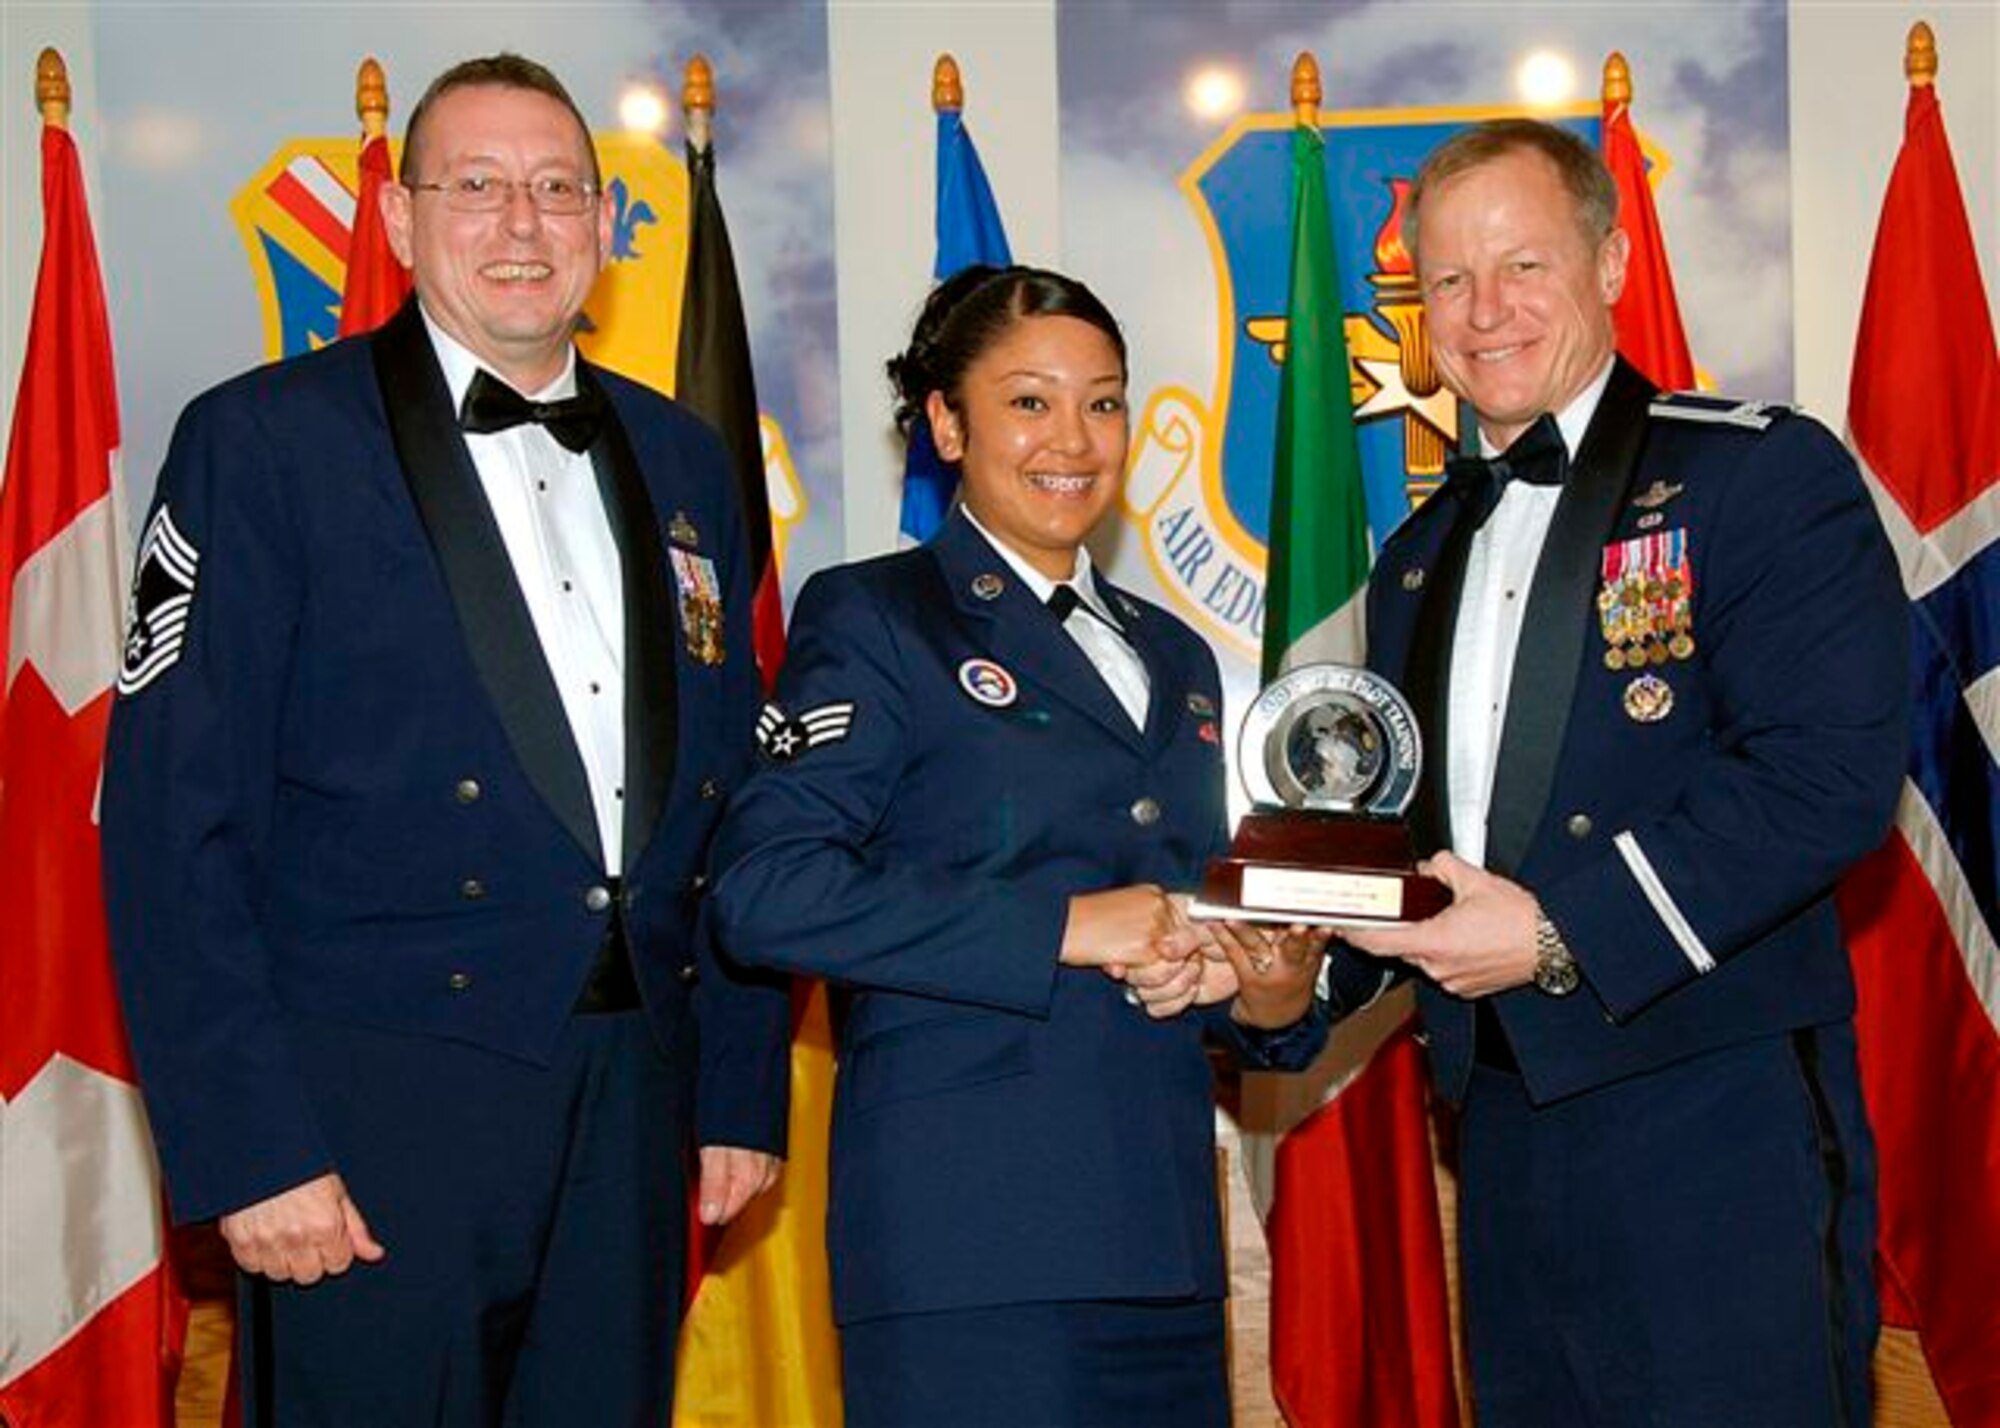 Senior Airman Stephanie Garcia, center, acceppts the award as the 80th Flying Training Wing's 2008 Airman of the Year. The 80th FTW Airman was recognized for experitise at managing the unit intro program which ensured that 134 inbound personnel were properly sponsored and welcomed to Sheppard. Also pictured is Col. David Petersen, 80th FTW commander, and Chief Master Sgt. Norman Thierolf, the wing's command chief. (U.S. Air Force photo) 